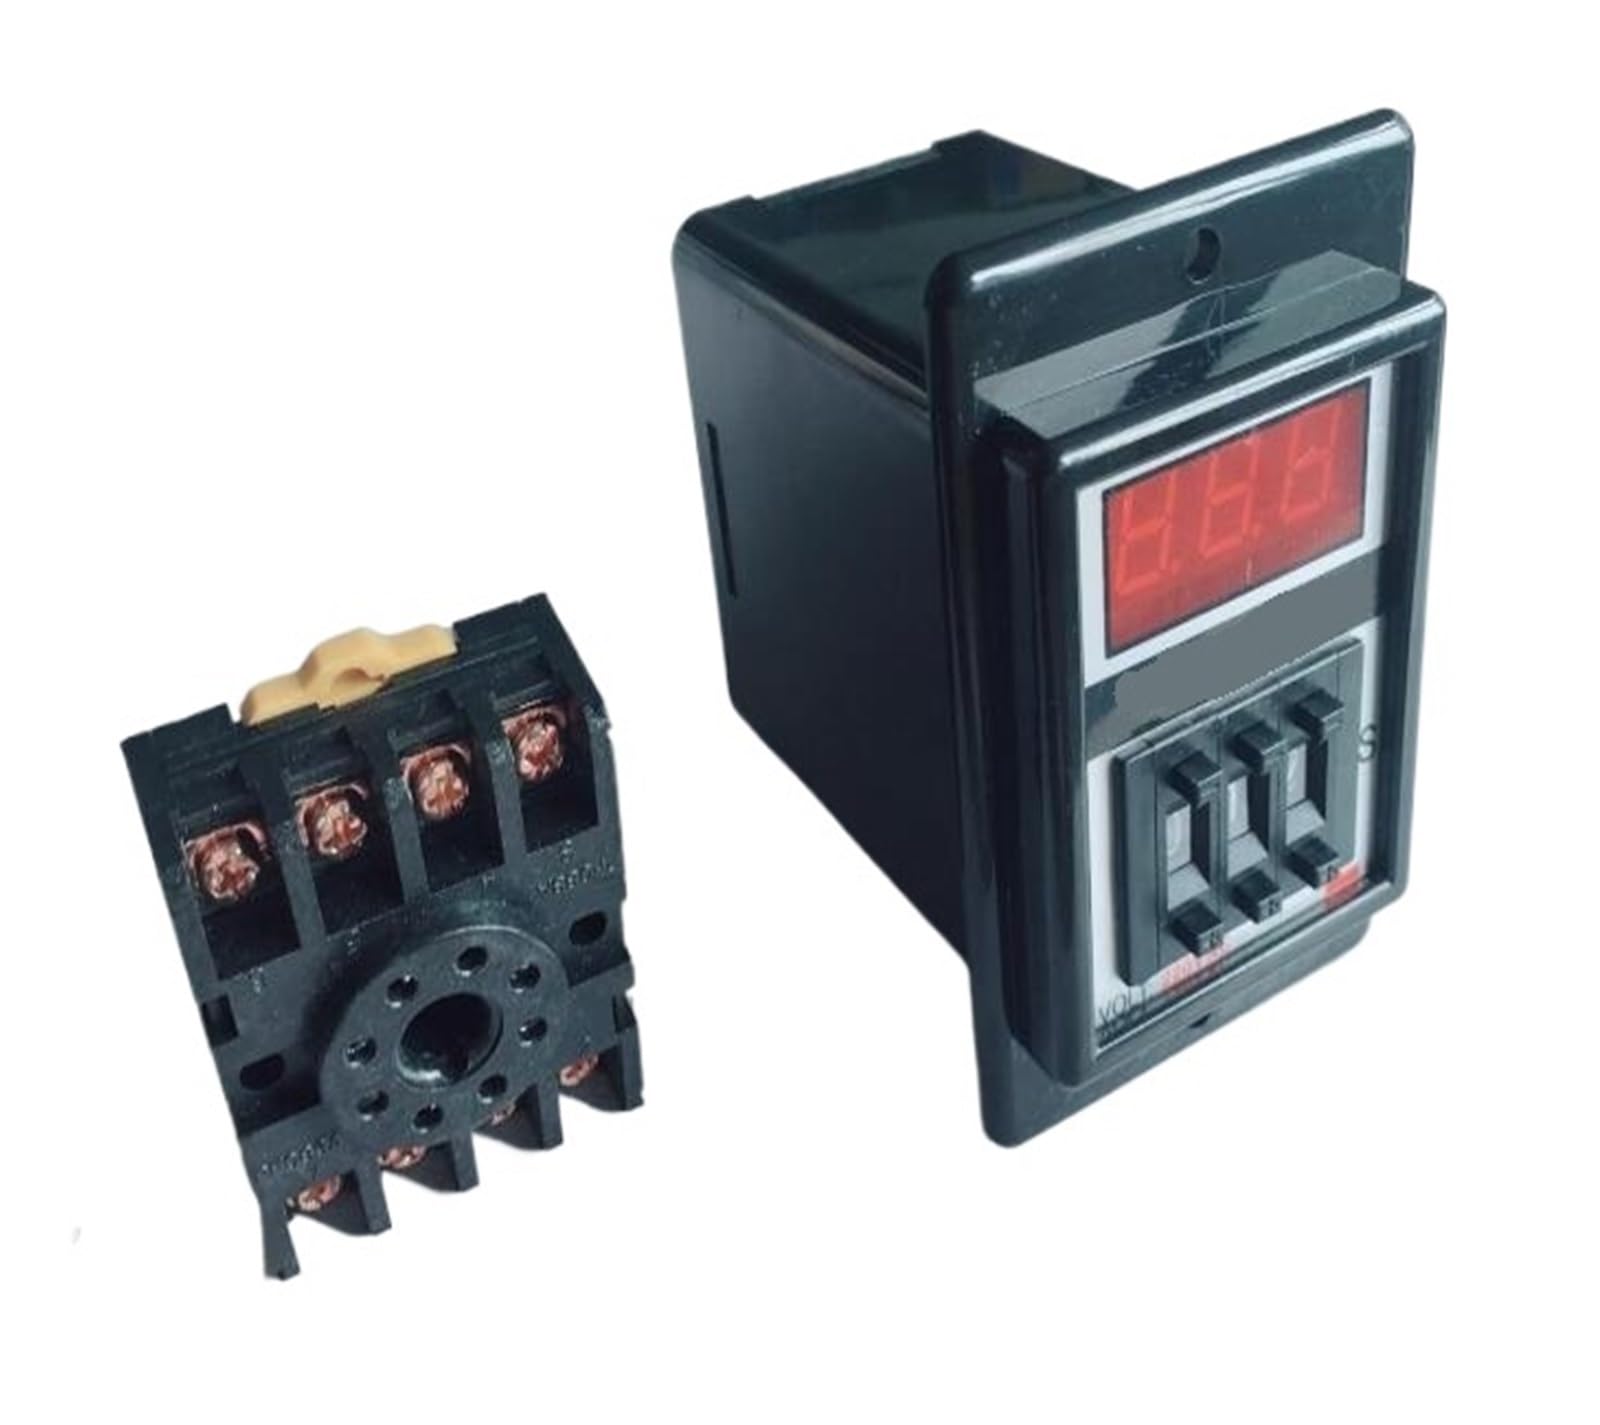 1-99S 1-9.9S 1-99M digits programmable timer delay relay ASY-2D Delay Timer Time Relay 8PIN with base ZDVHOMCB(ASY-2D 99S,DC24V) von ZDVHOMCB